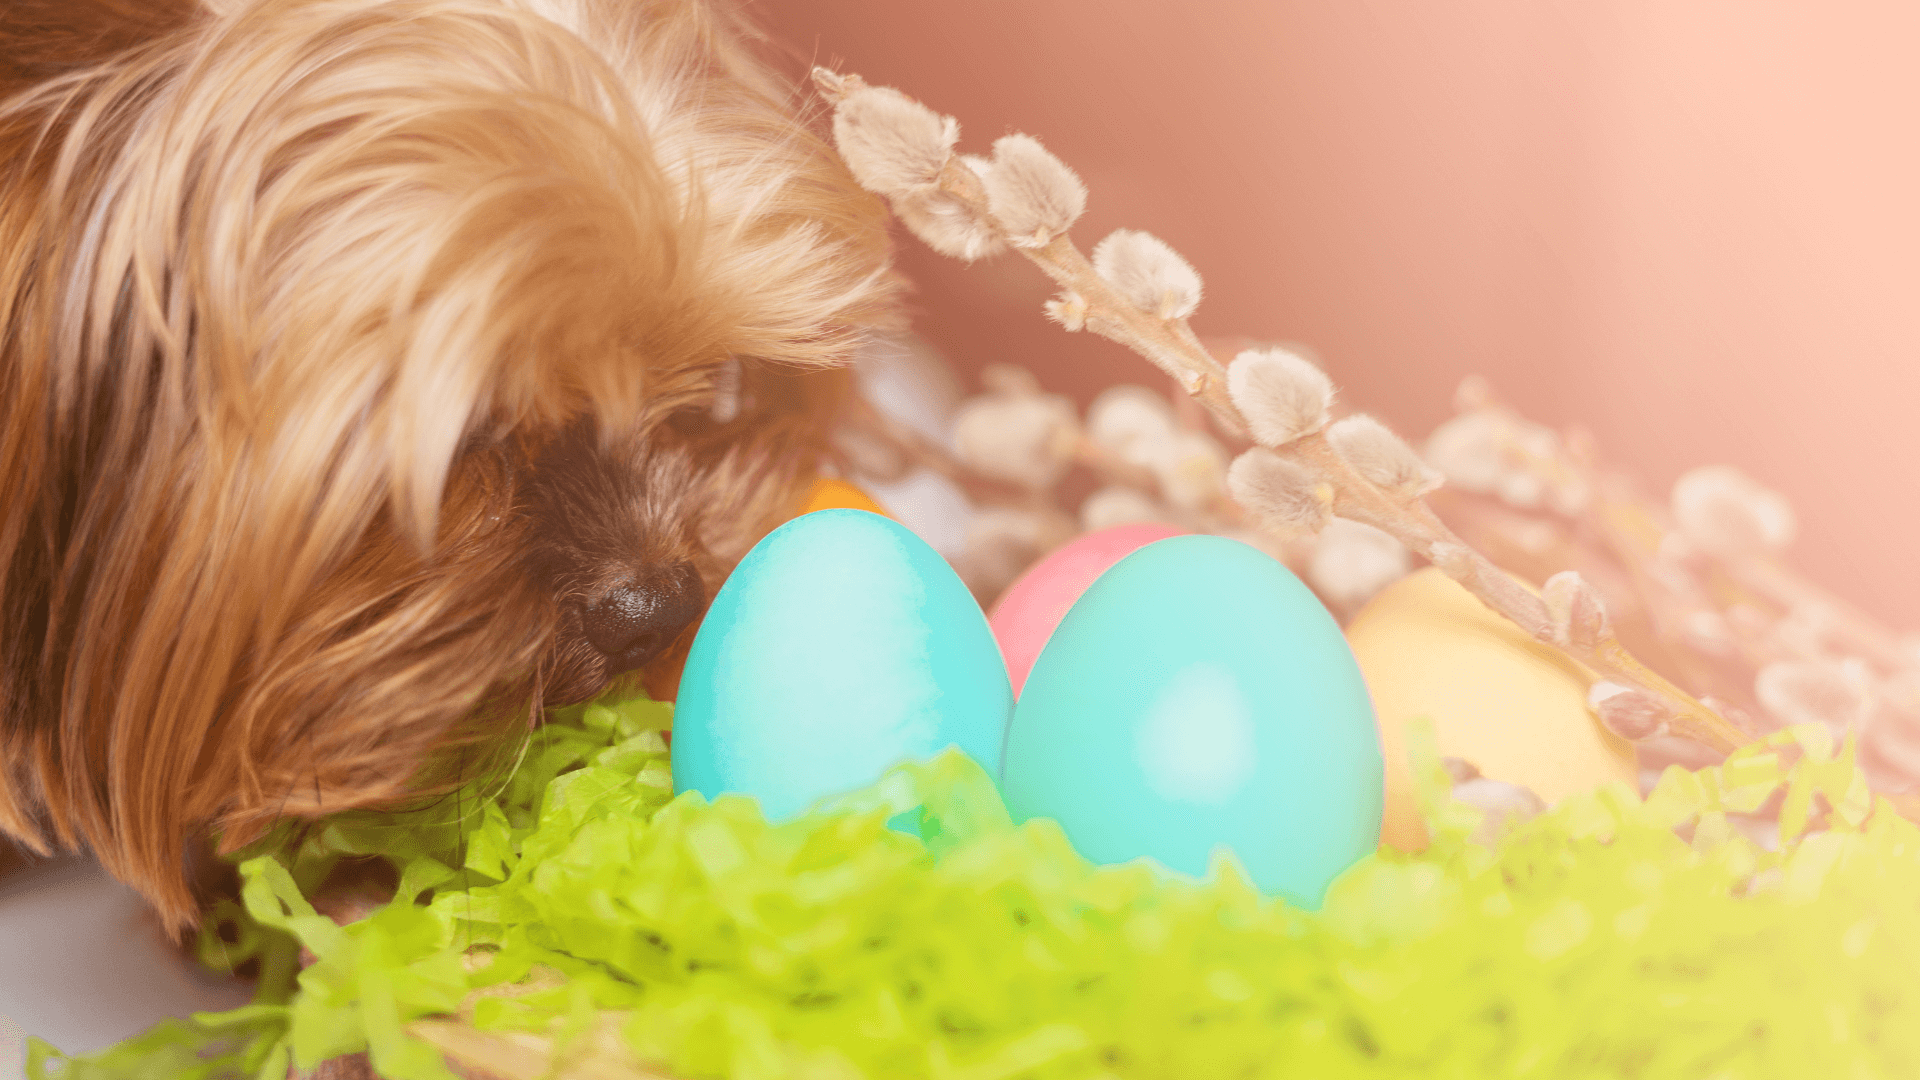 What are the Benefits of Feeding Eggs to Dogs